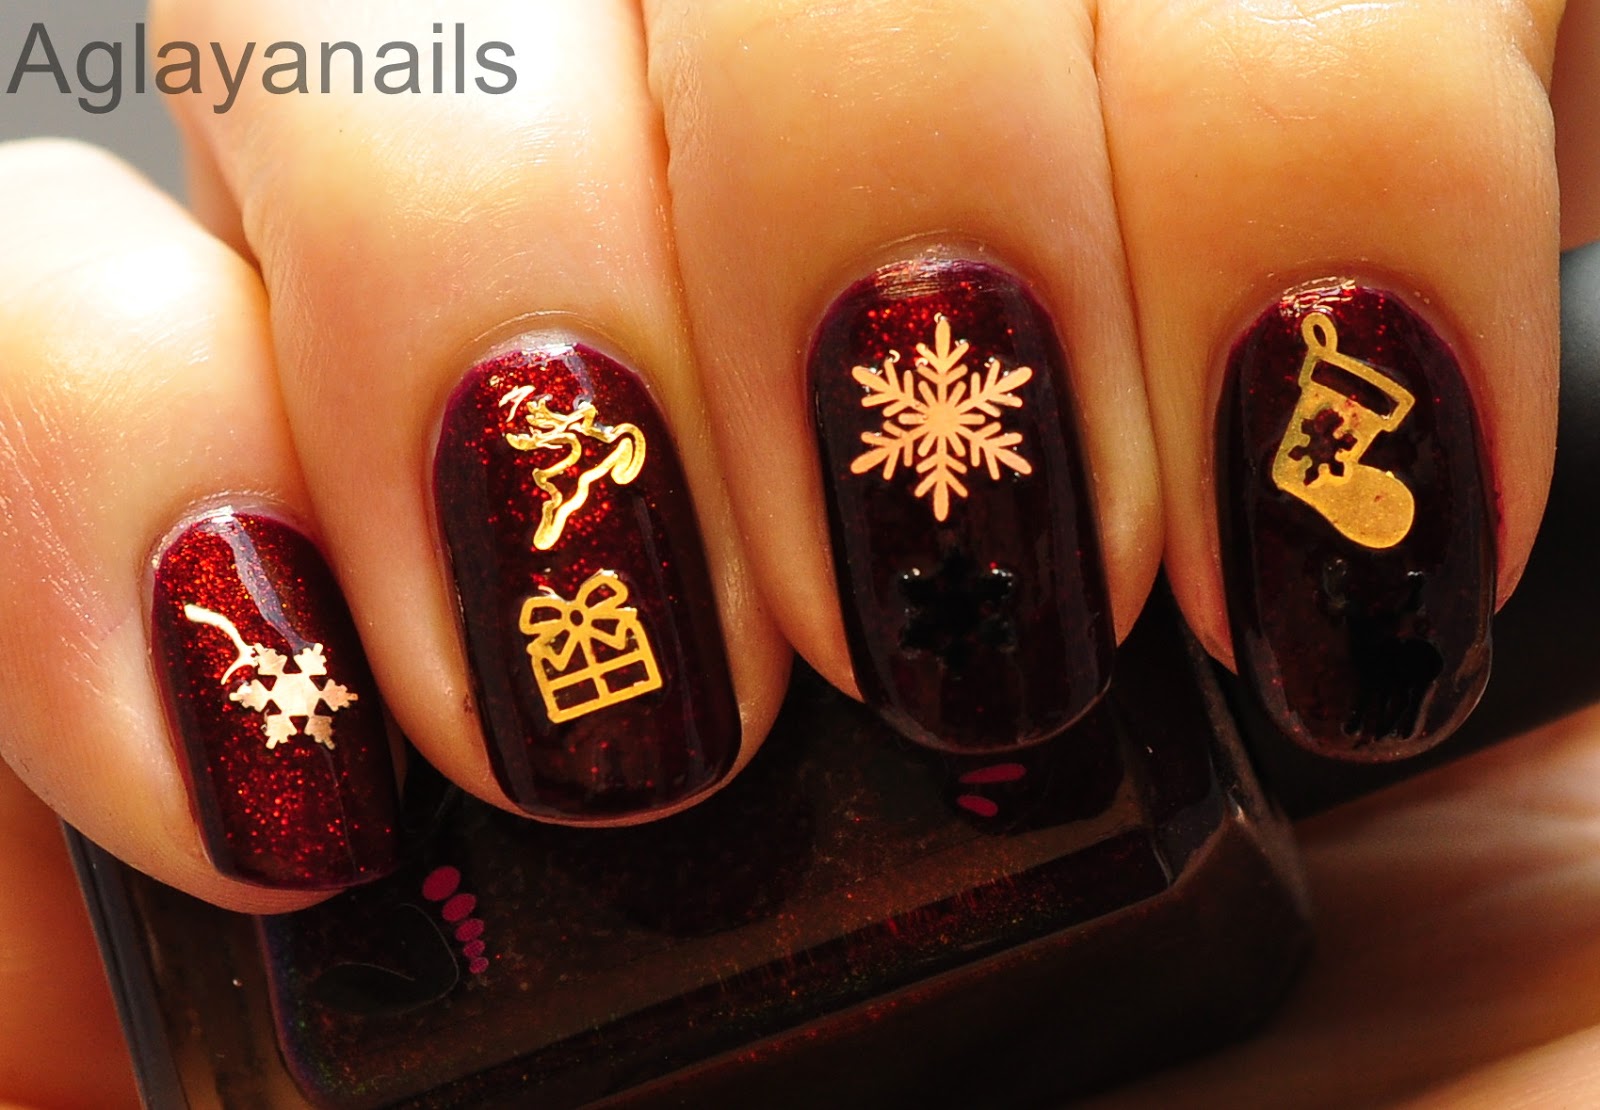 5. "Festive Nail Art for Gifts" - wide 4